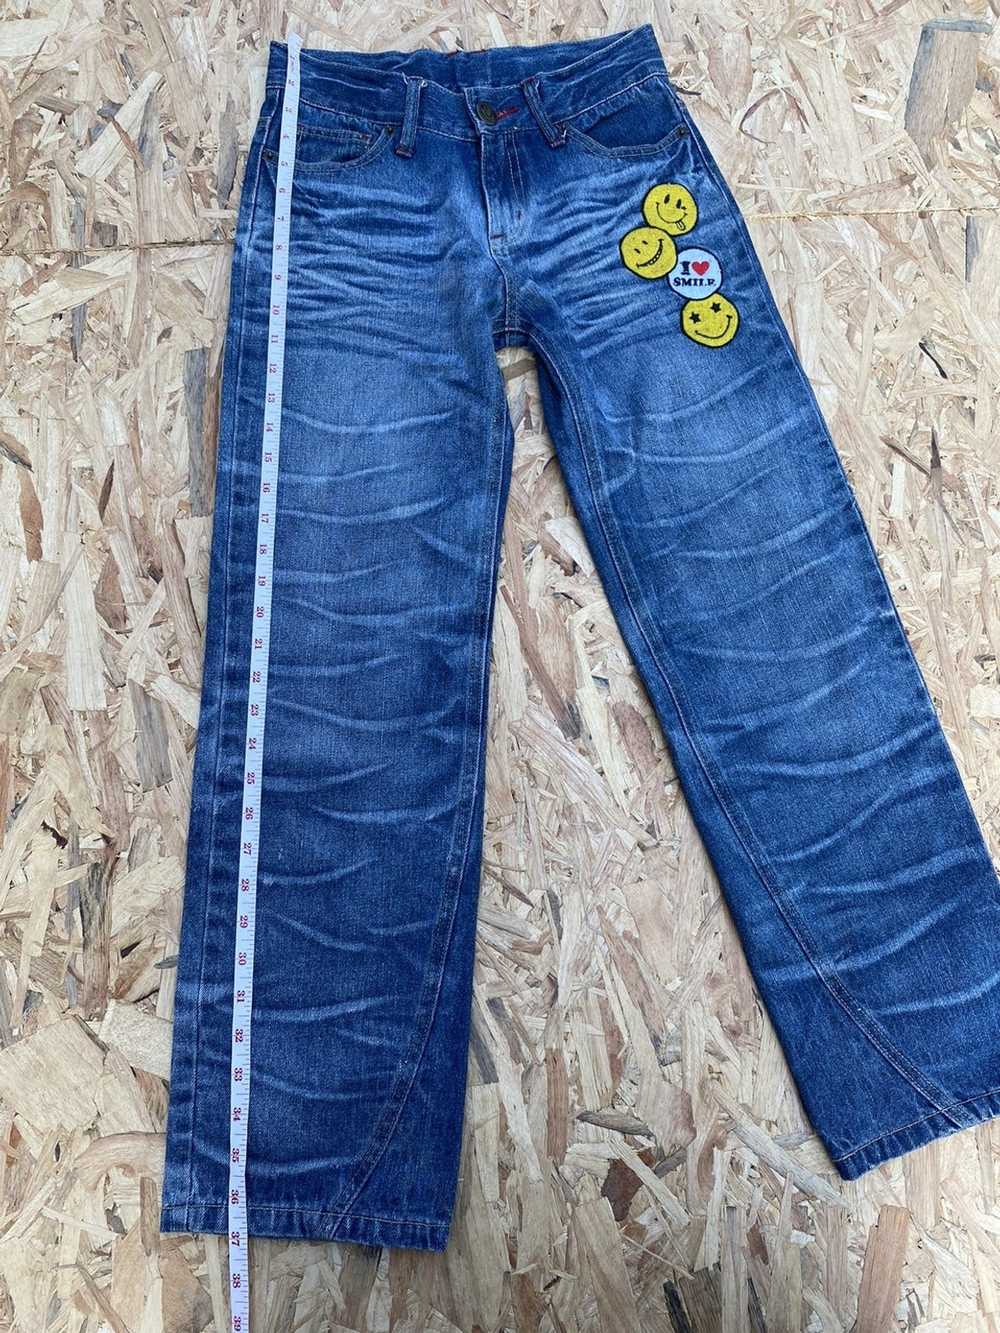 Japanese Brand Smiley Face Jeans - image 8